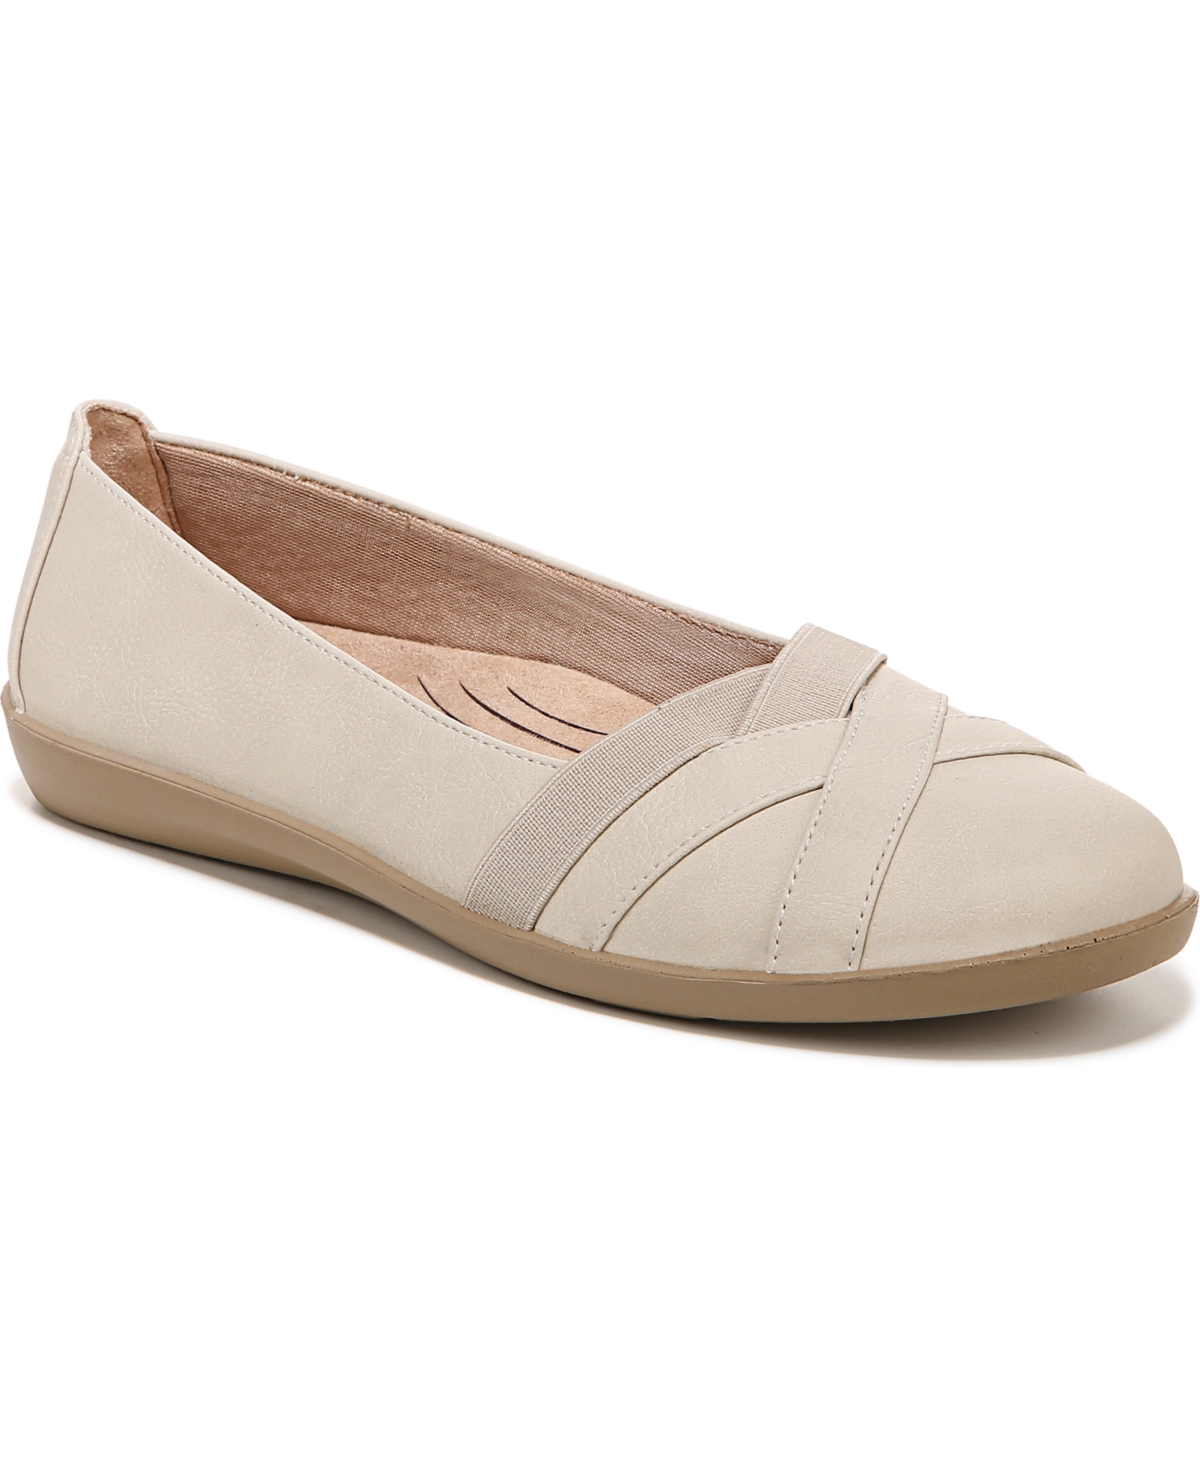 Northern Slip On Flats - Almond Milk Faux Leather